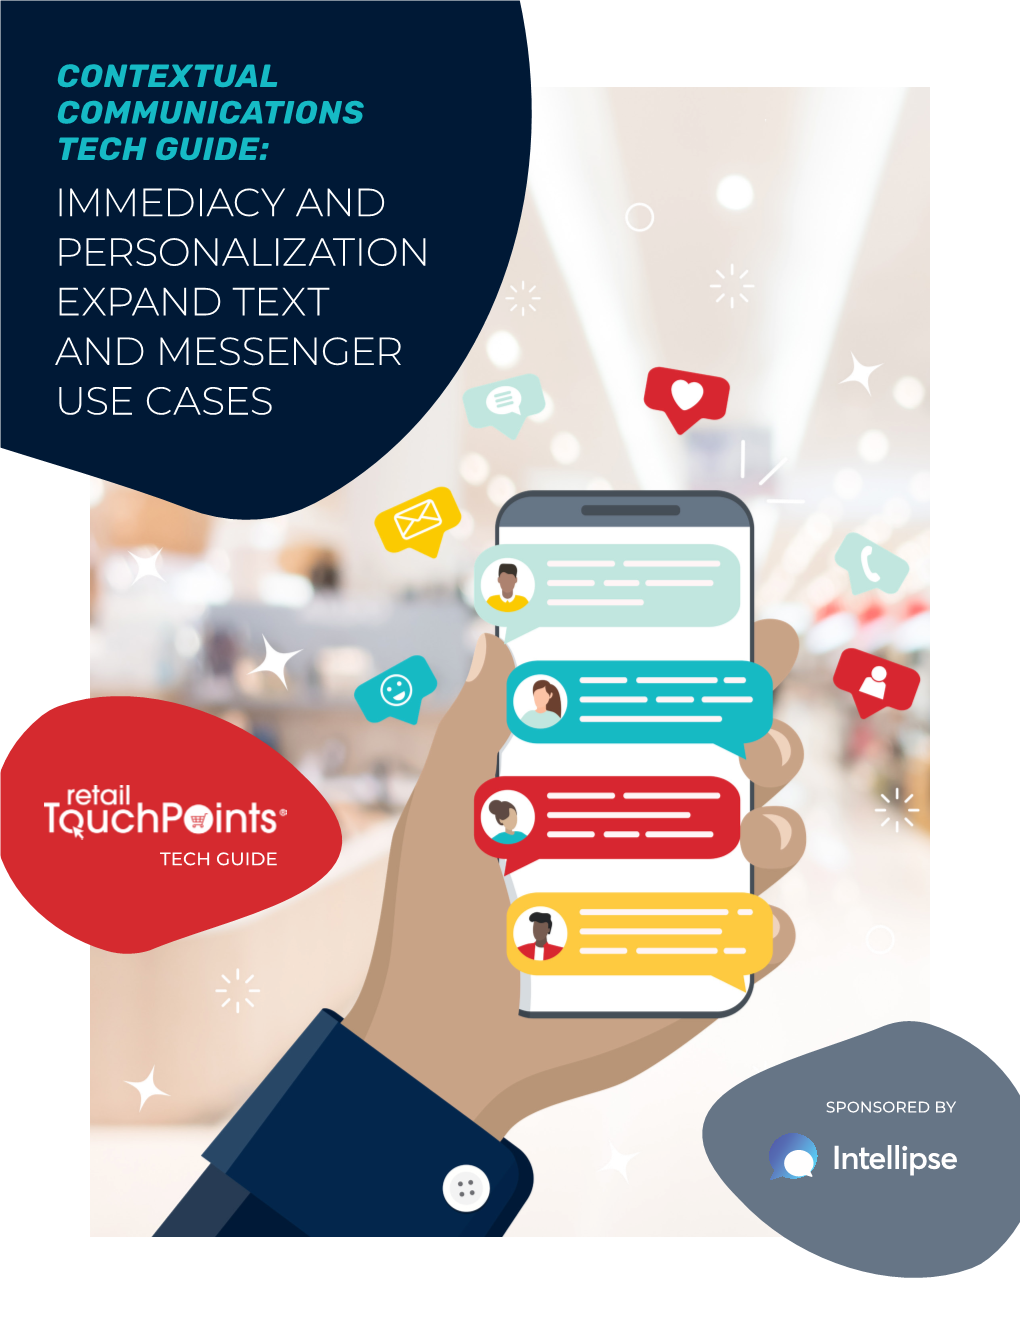 Immediacy and Personalization Expand Text and Messenger Use Cases